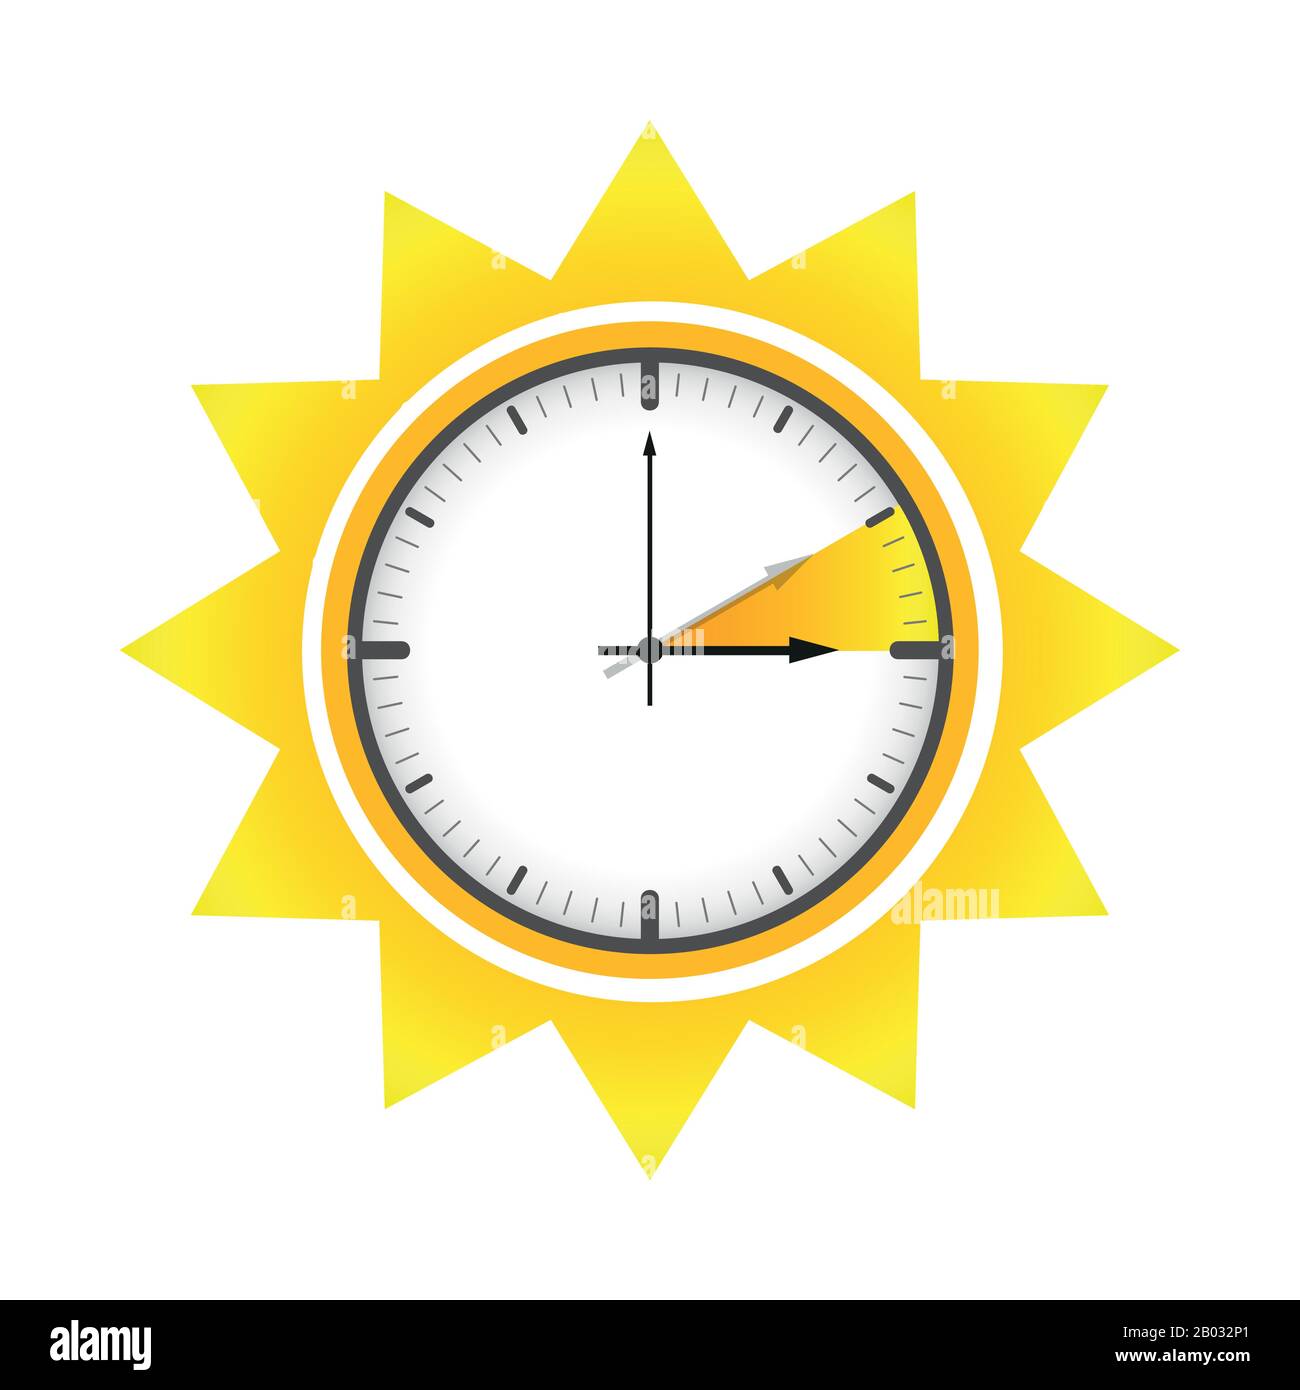 Daylight Saving Time. Change Clock To Summer Time. Stock Photo - Image of  saving, isolated: 110689460